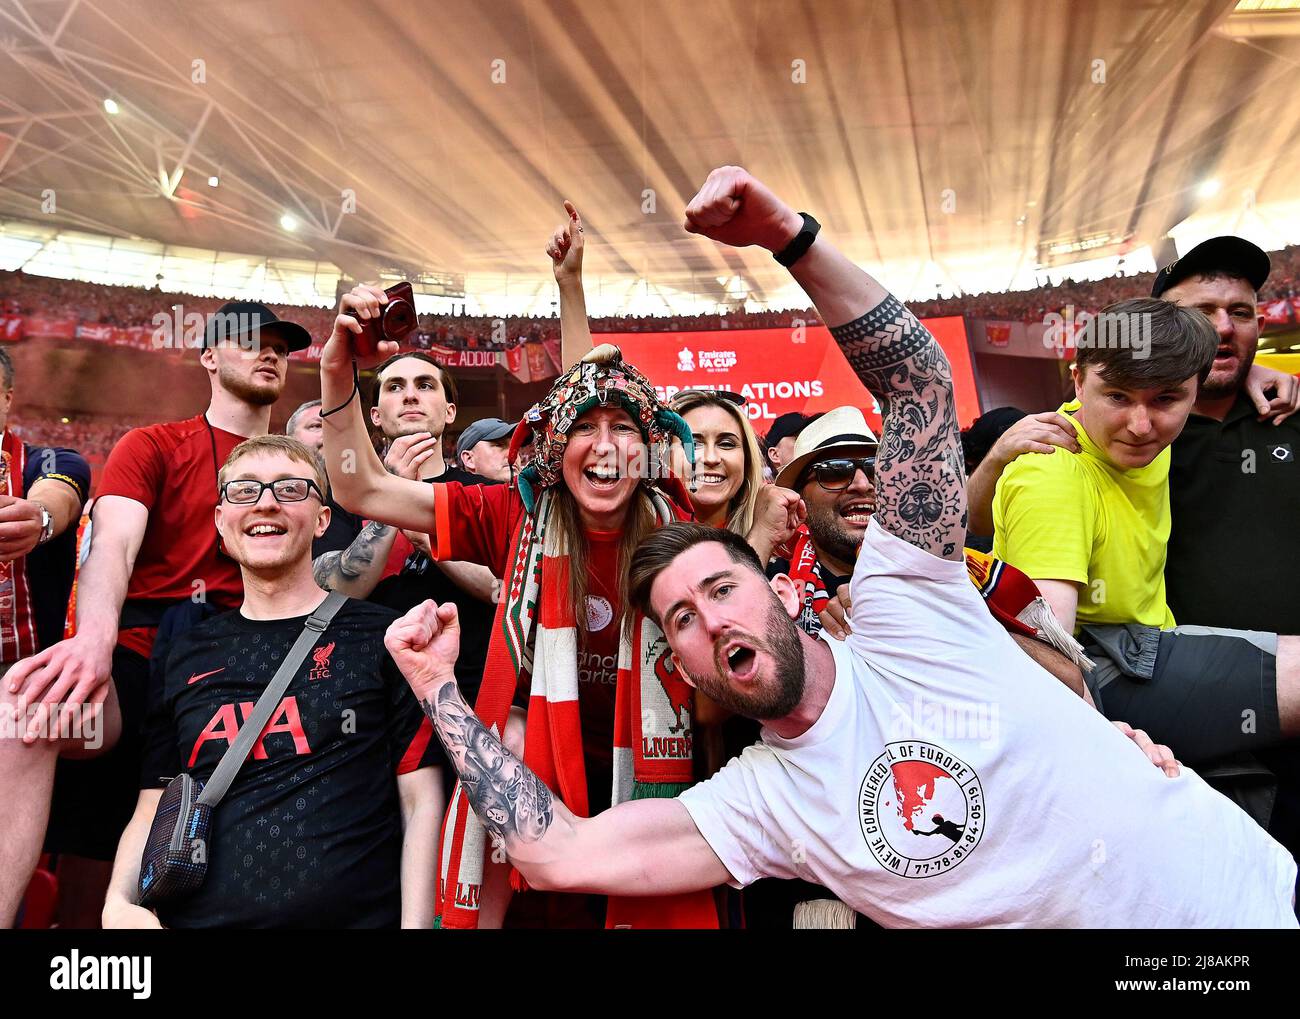 London, UK. 14th May, 2022. Liverpool fans celebrate during the FA Cup Final match between Chelsea and Liverpool at Wembley Stadium on May 14th 2022 in London, England. (Photo by Garry Bowden/phcimages.com) Credit: PHC Images/Alamy Live News Stock Photo